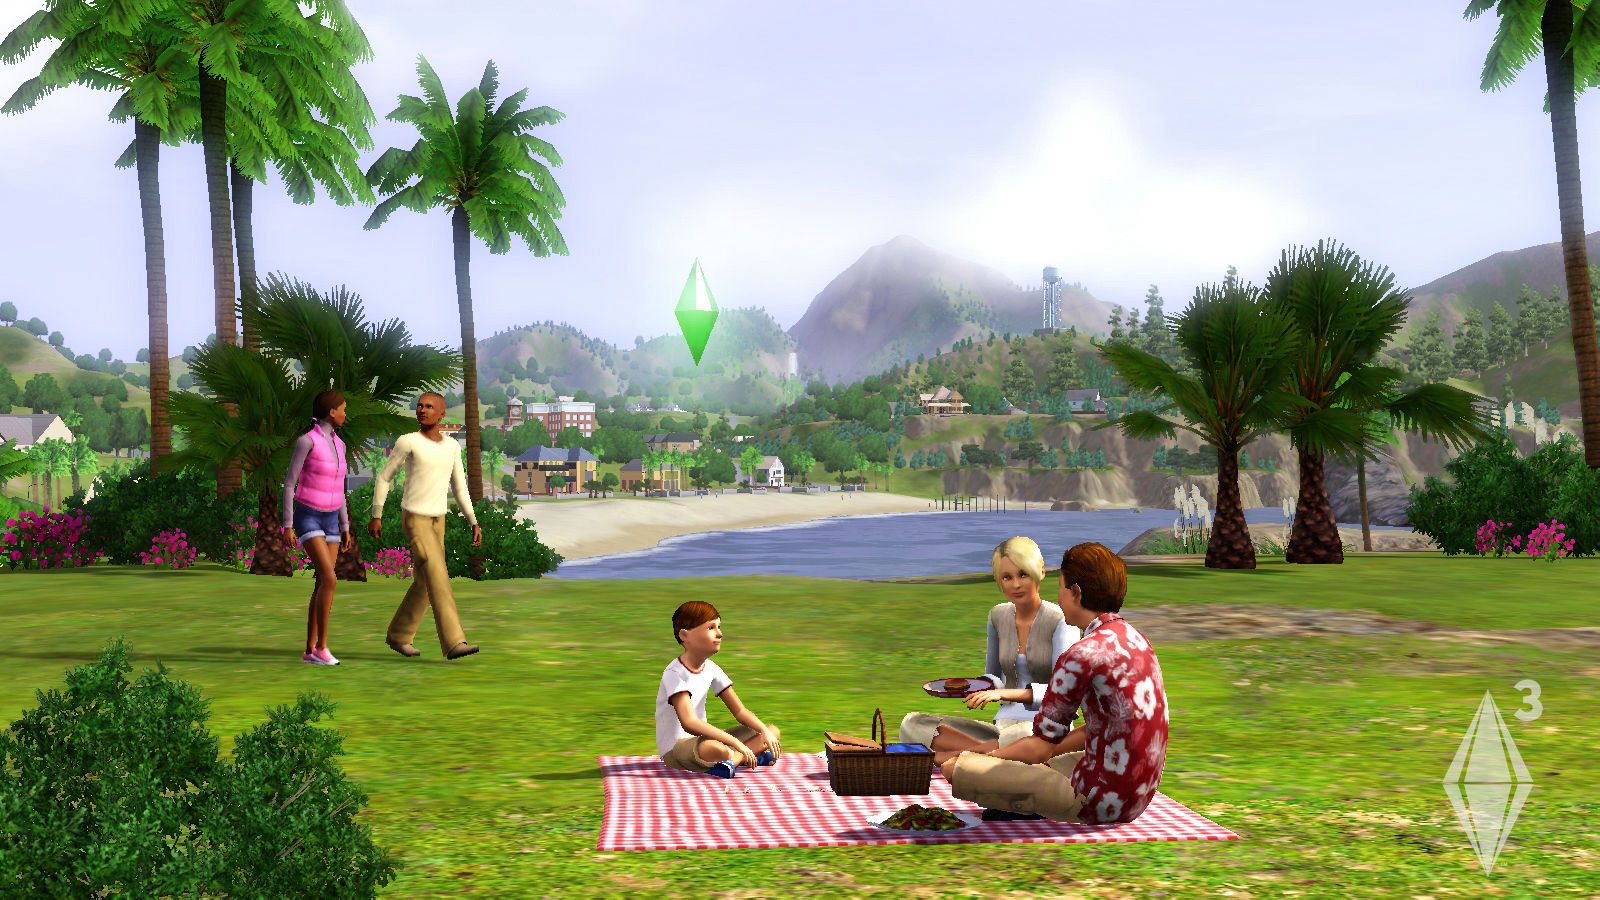 The Sims 3 v1.6.11 MOD APK (Unlimited Money)